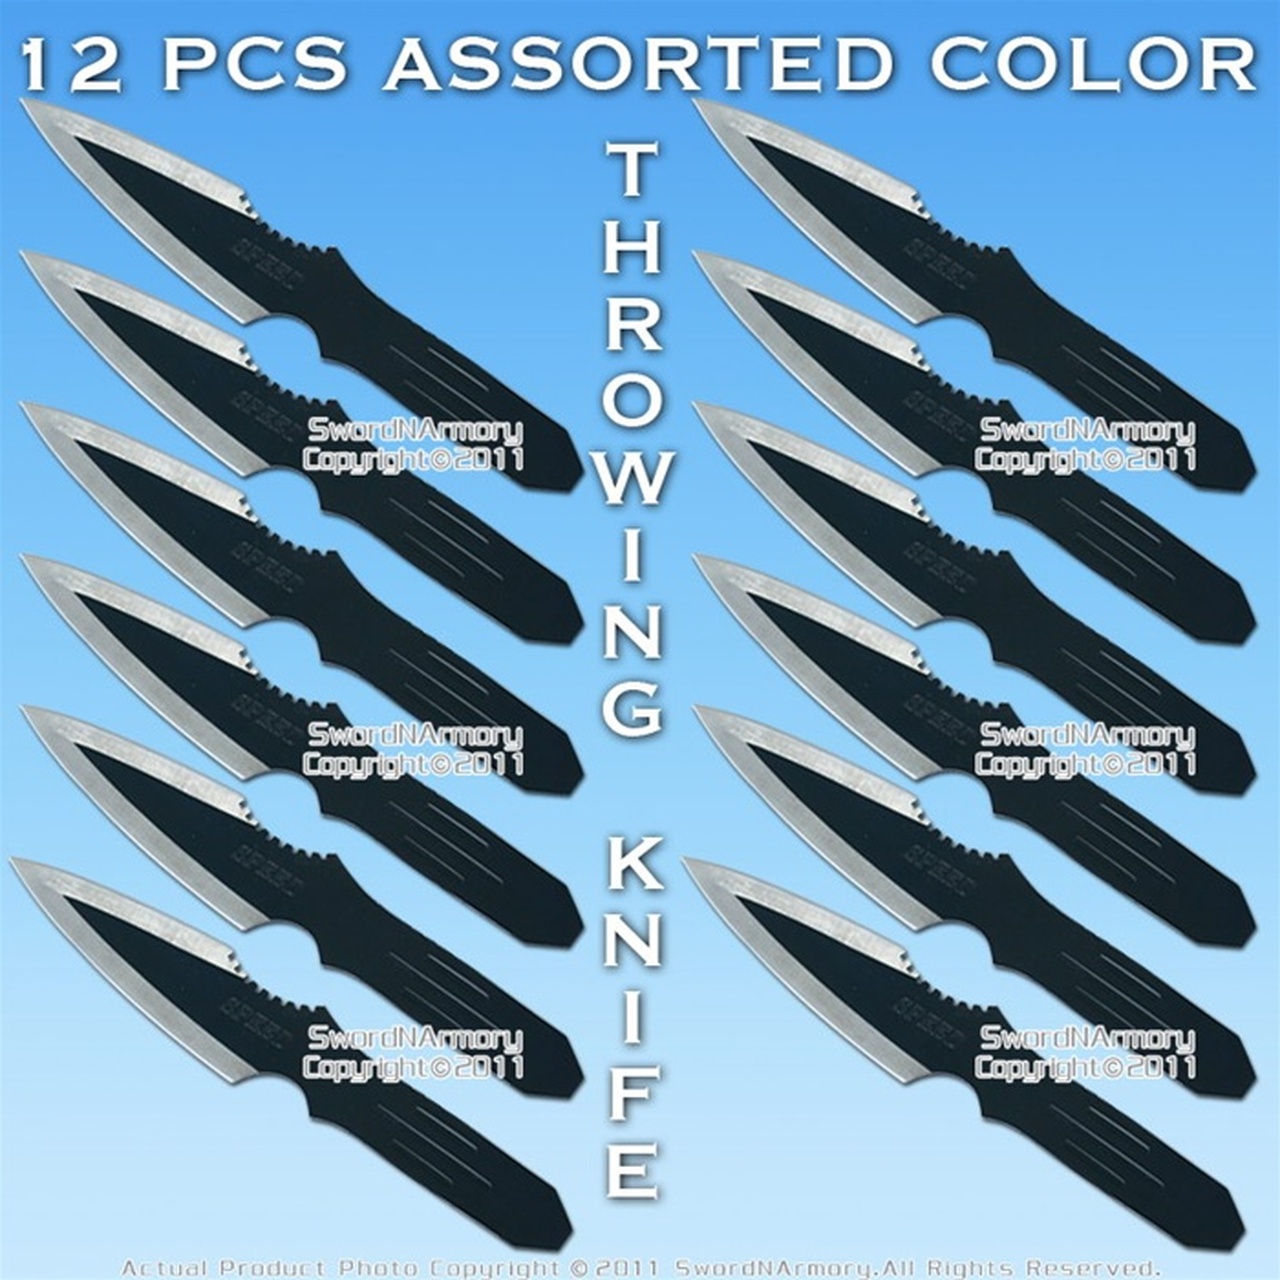 12 Pcs Assorted Color Thrower Throwing Knife Set W/ Case